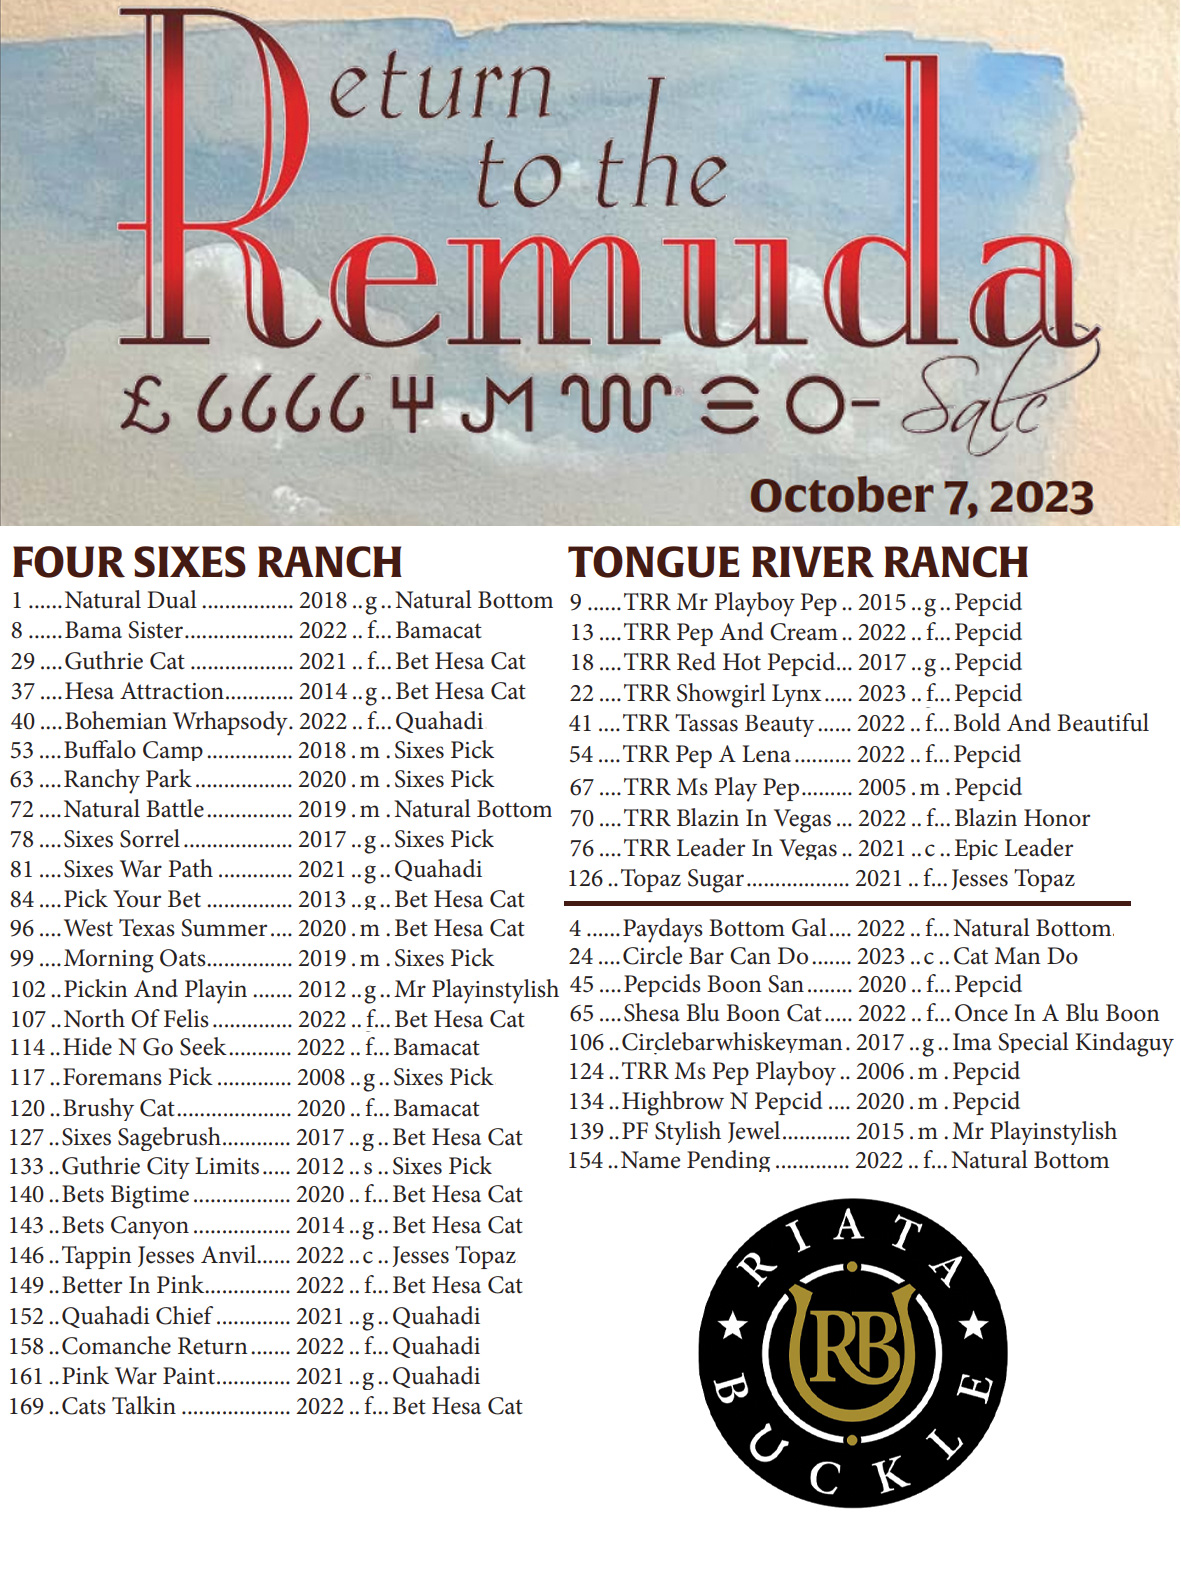 Event Ad for Return to the Remuda Sale